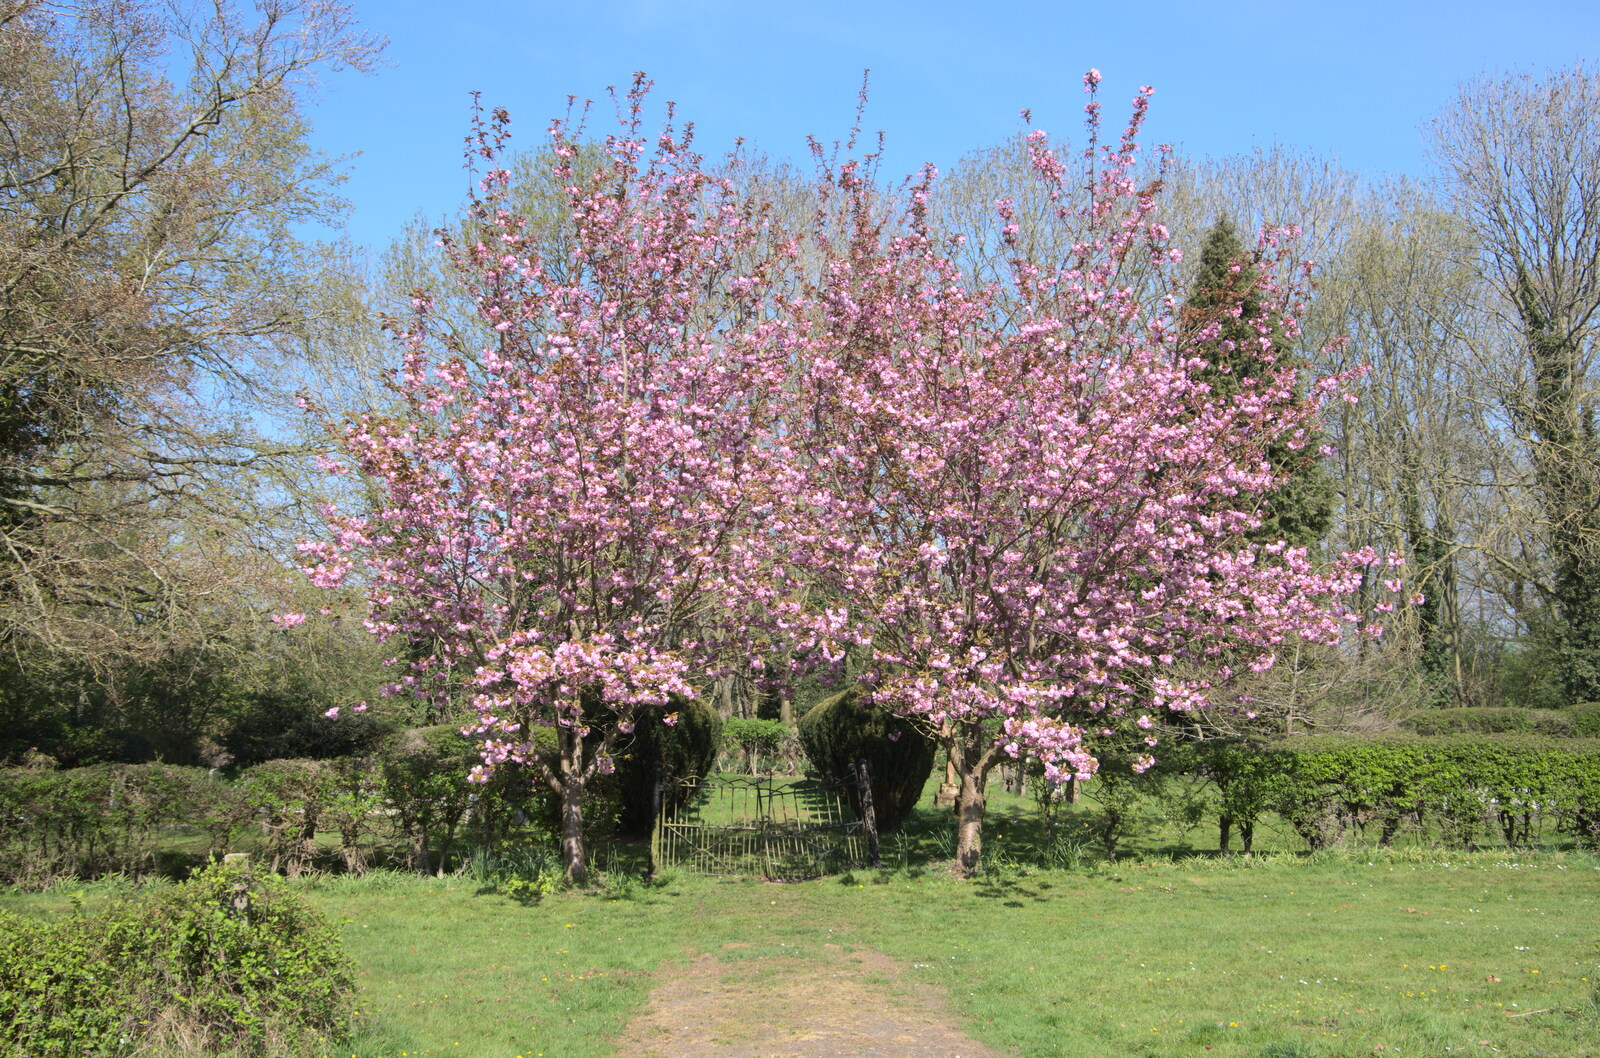 The blossom is out from A Weekend Camping Trip in the Garden, Brome, Suffolk - 11th April 2020